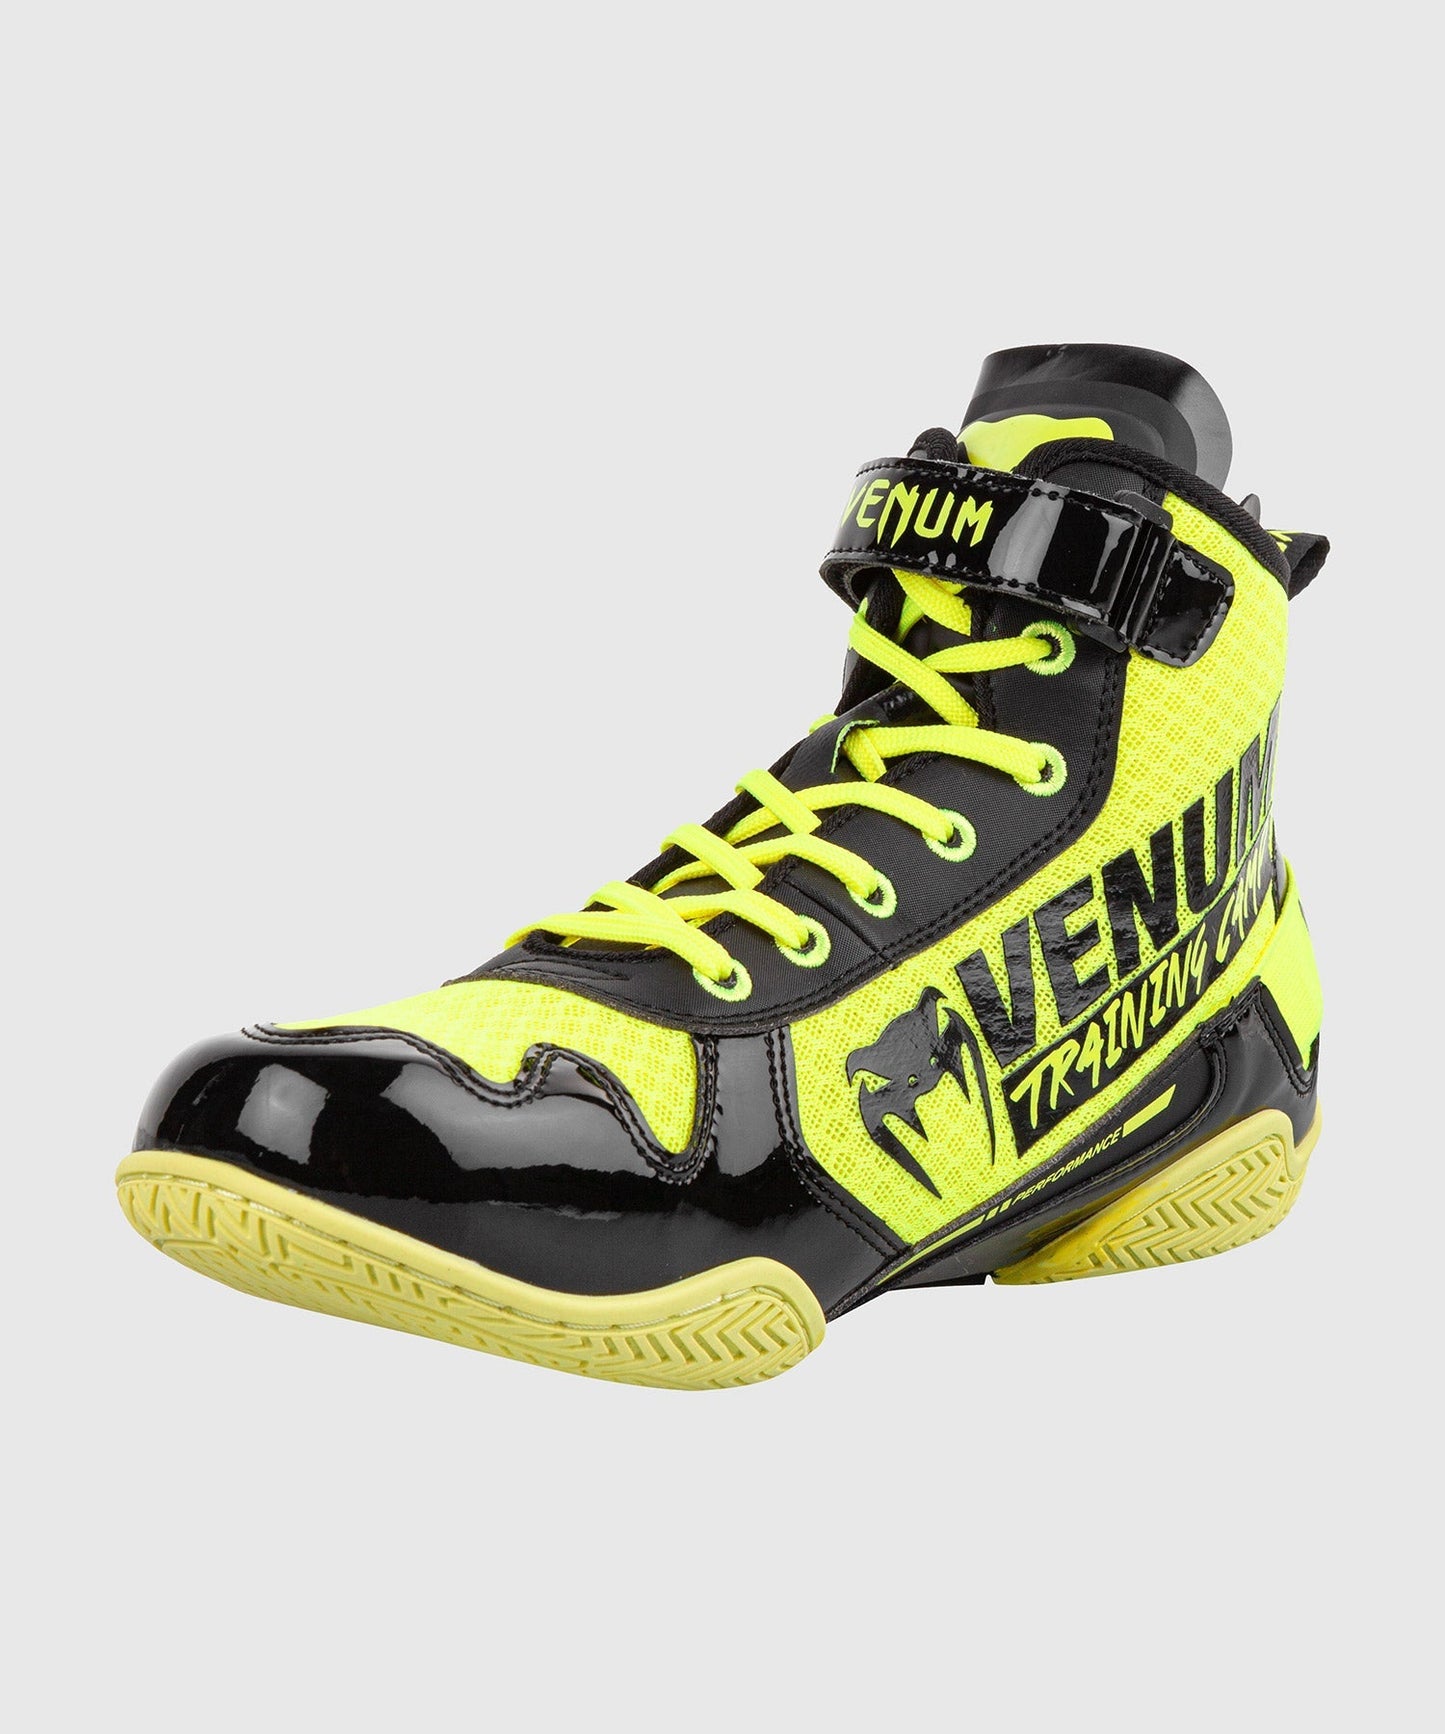 Venum Giant Low VTC 2 Edition Boxing Shoes - Neo Yellow/Black